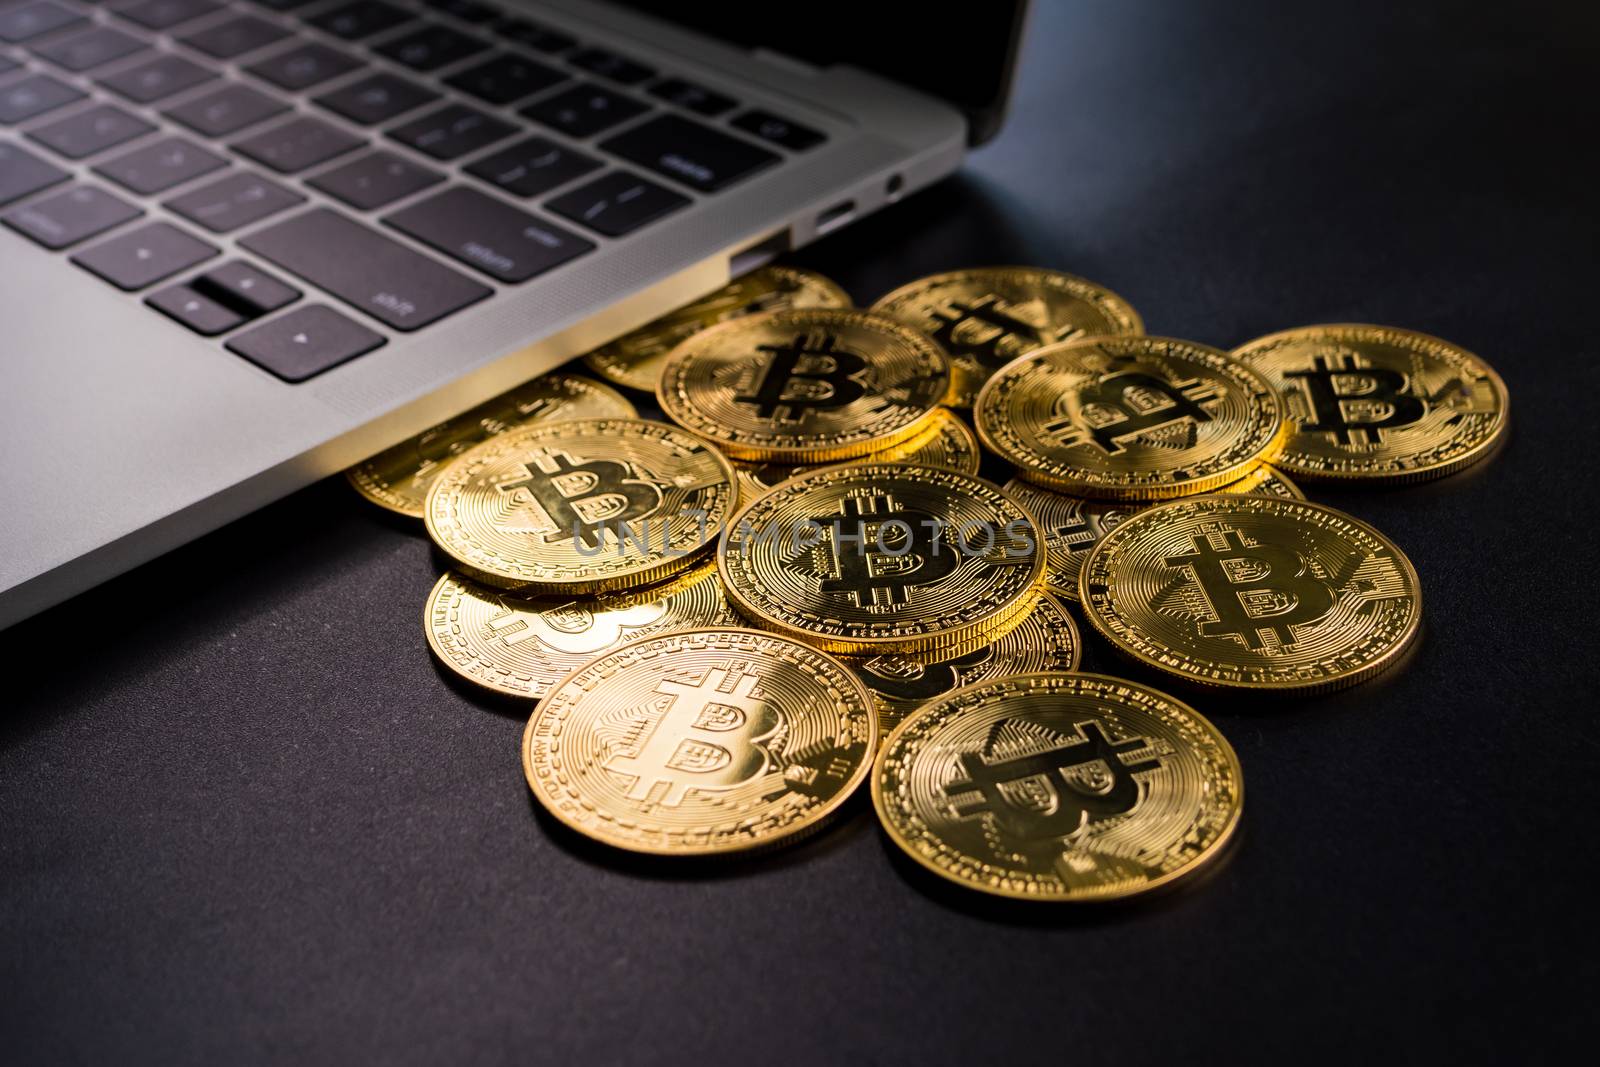 Computer and golden coins with bitcoin symbol on a black background.